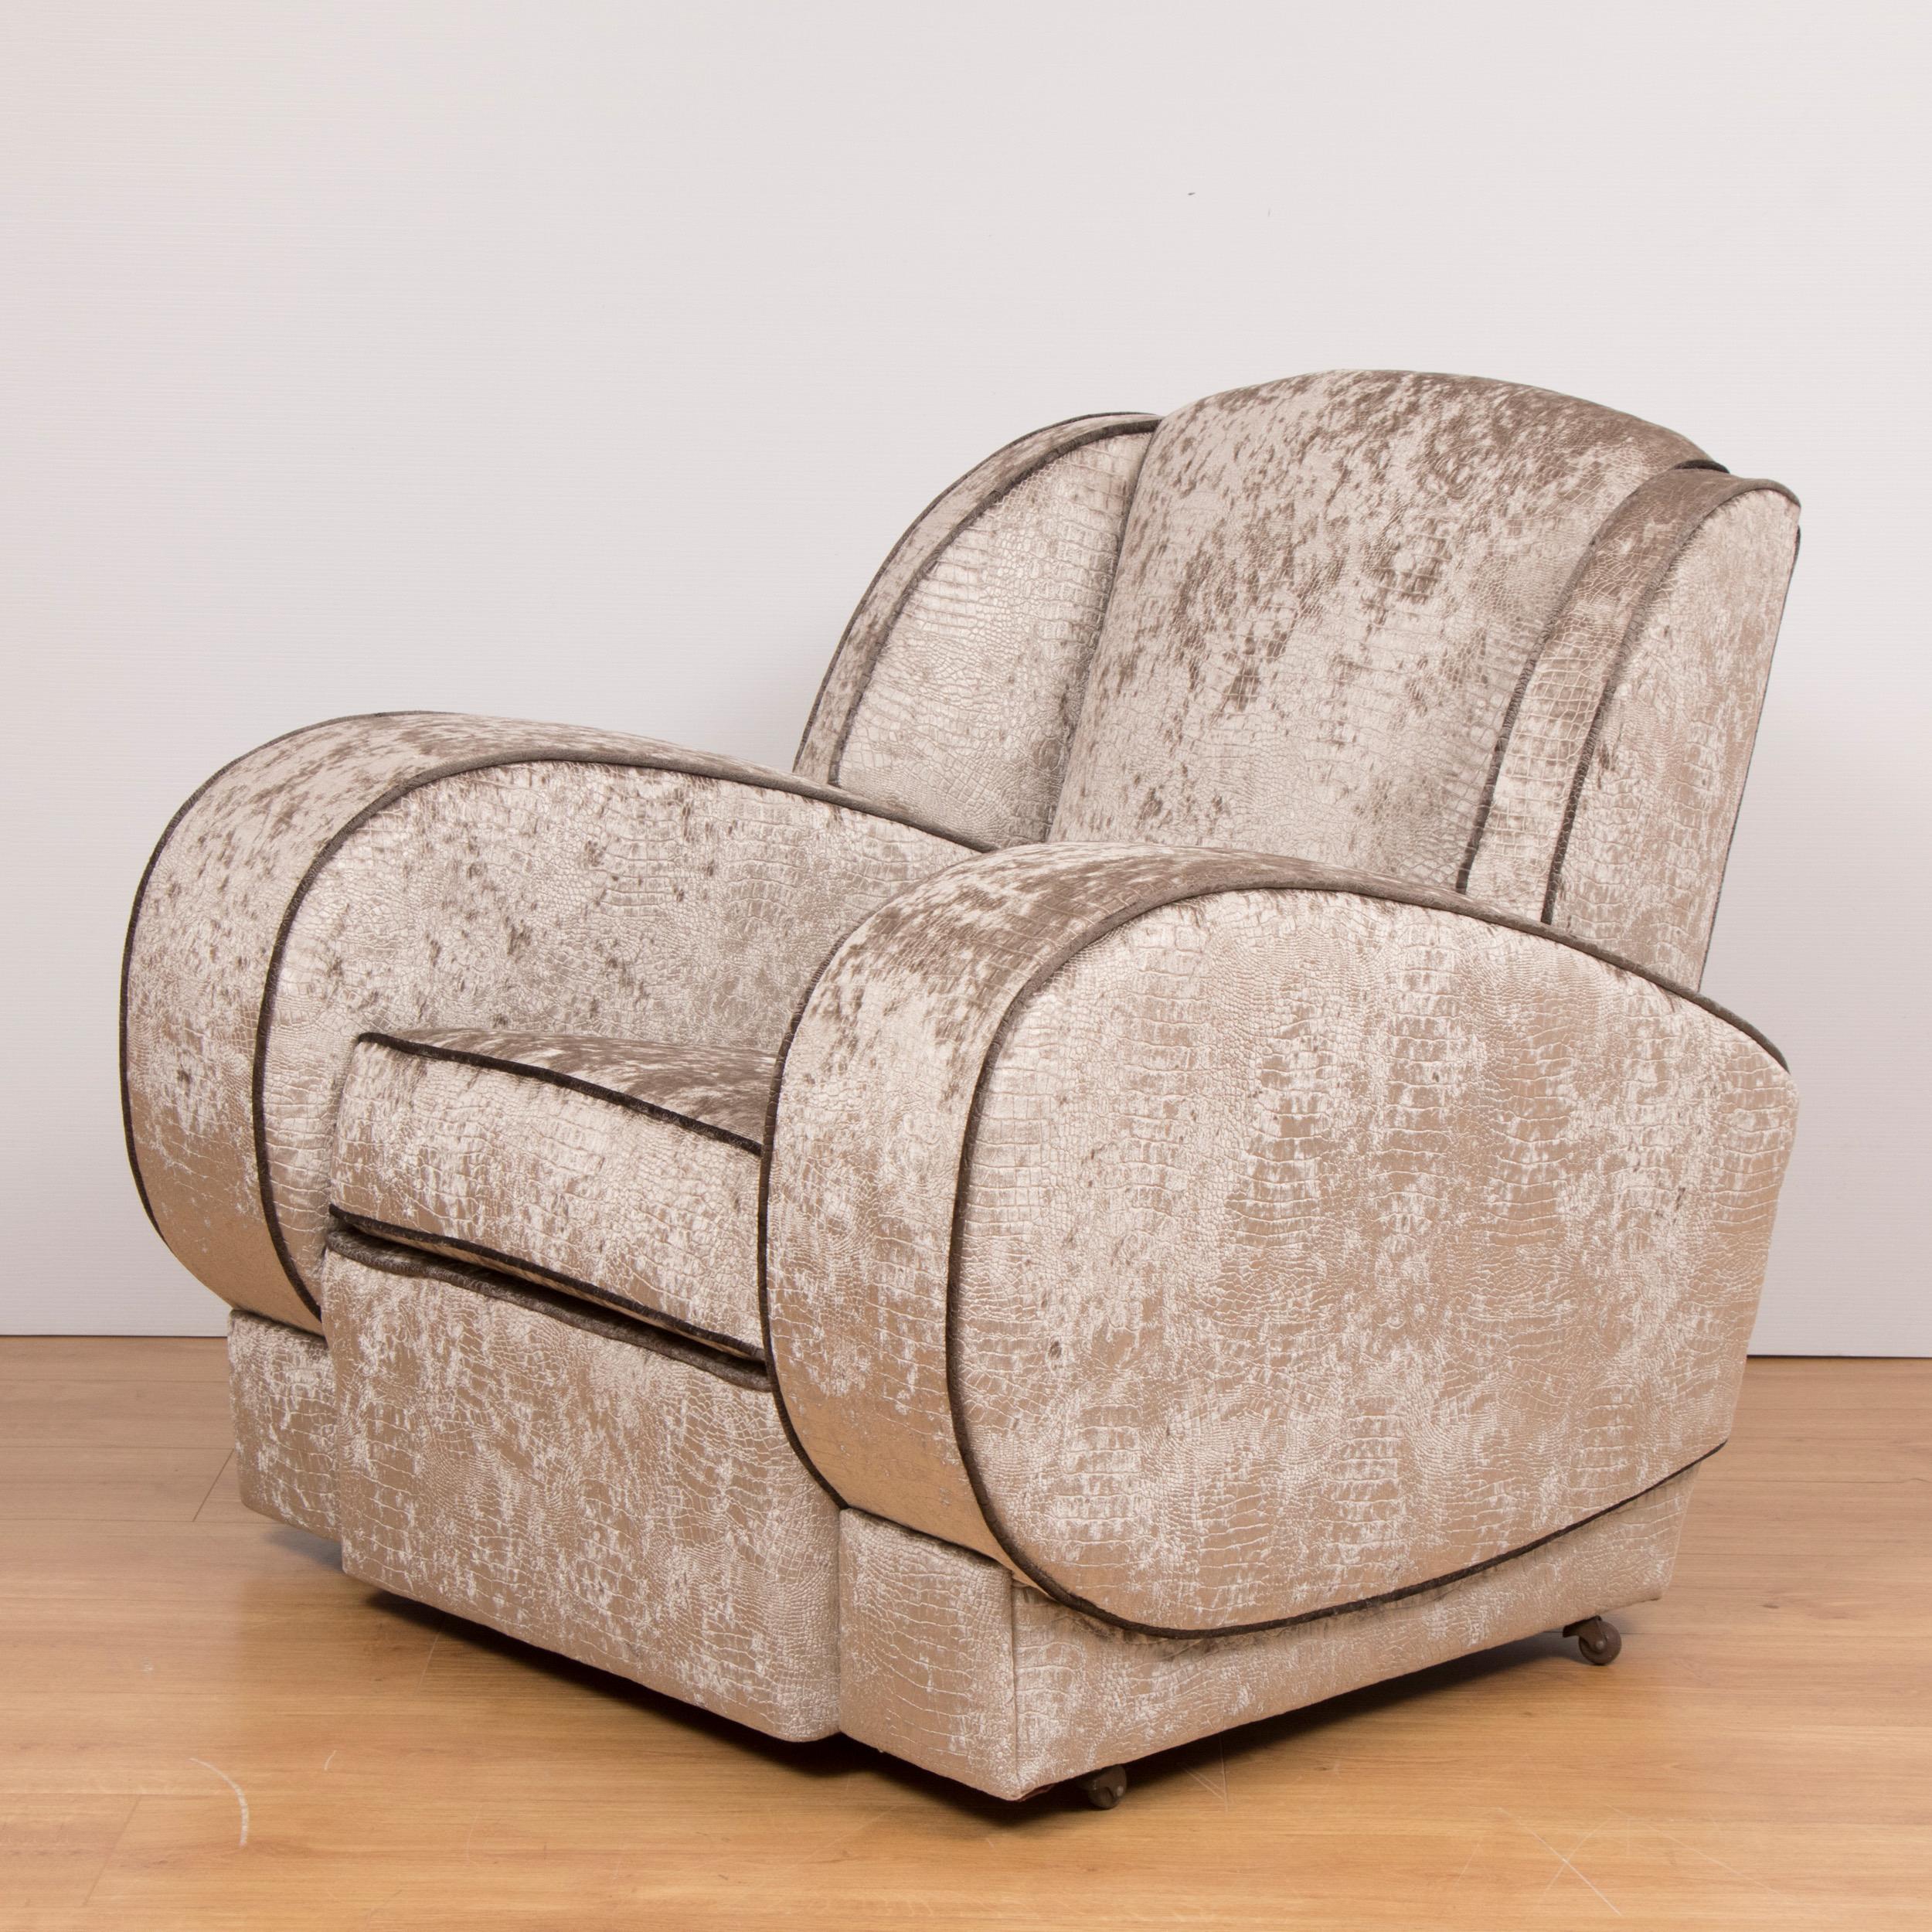 British Art Deco Armchairs Newly Upholstered in a Snakeskin Style Fabric In Good Condition For Sale In London, GB